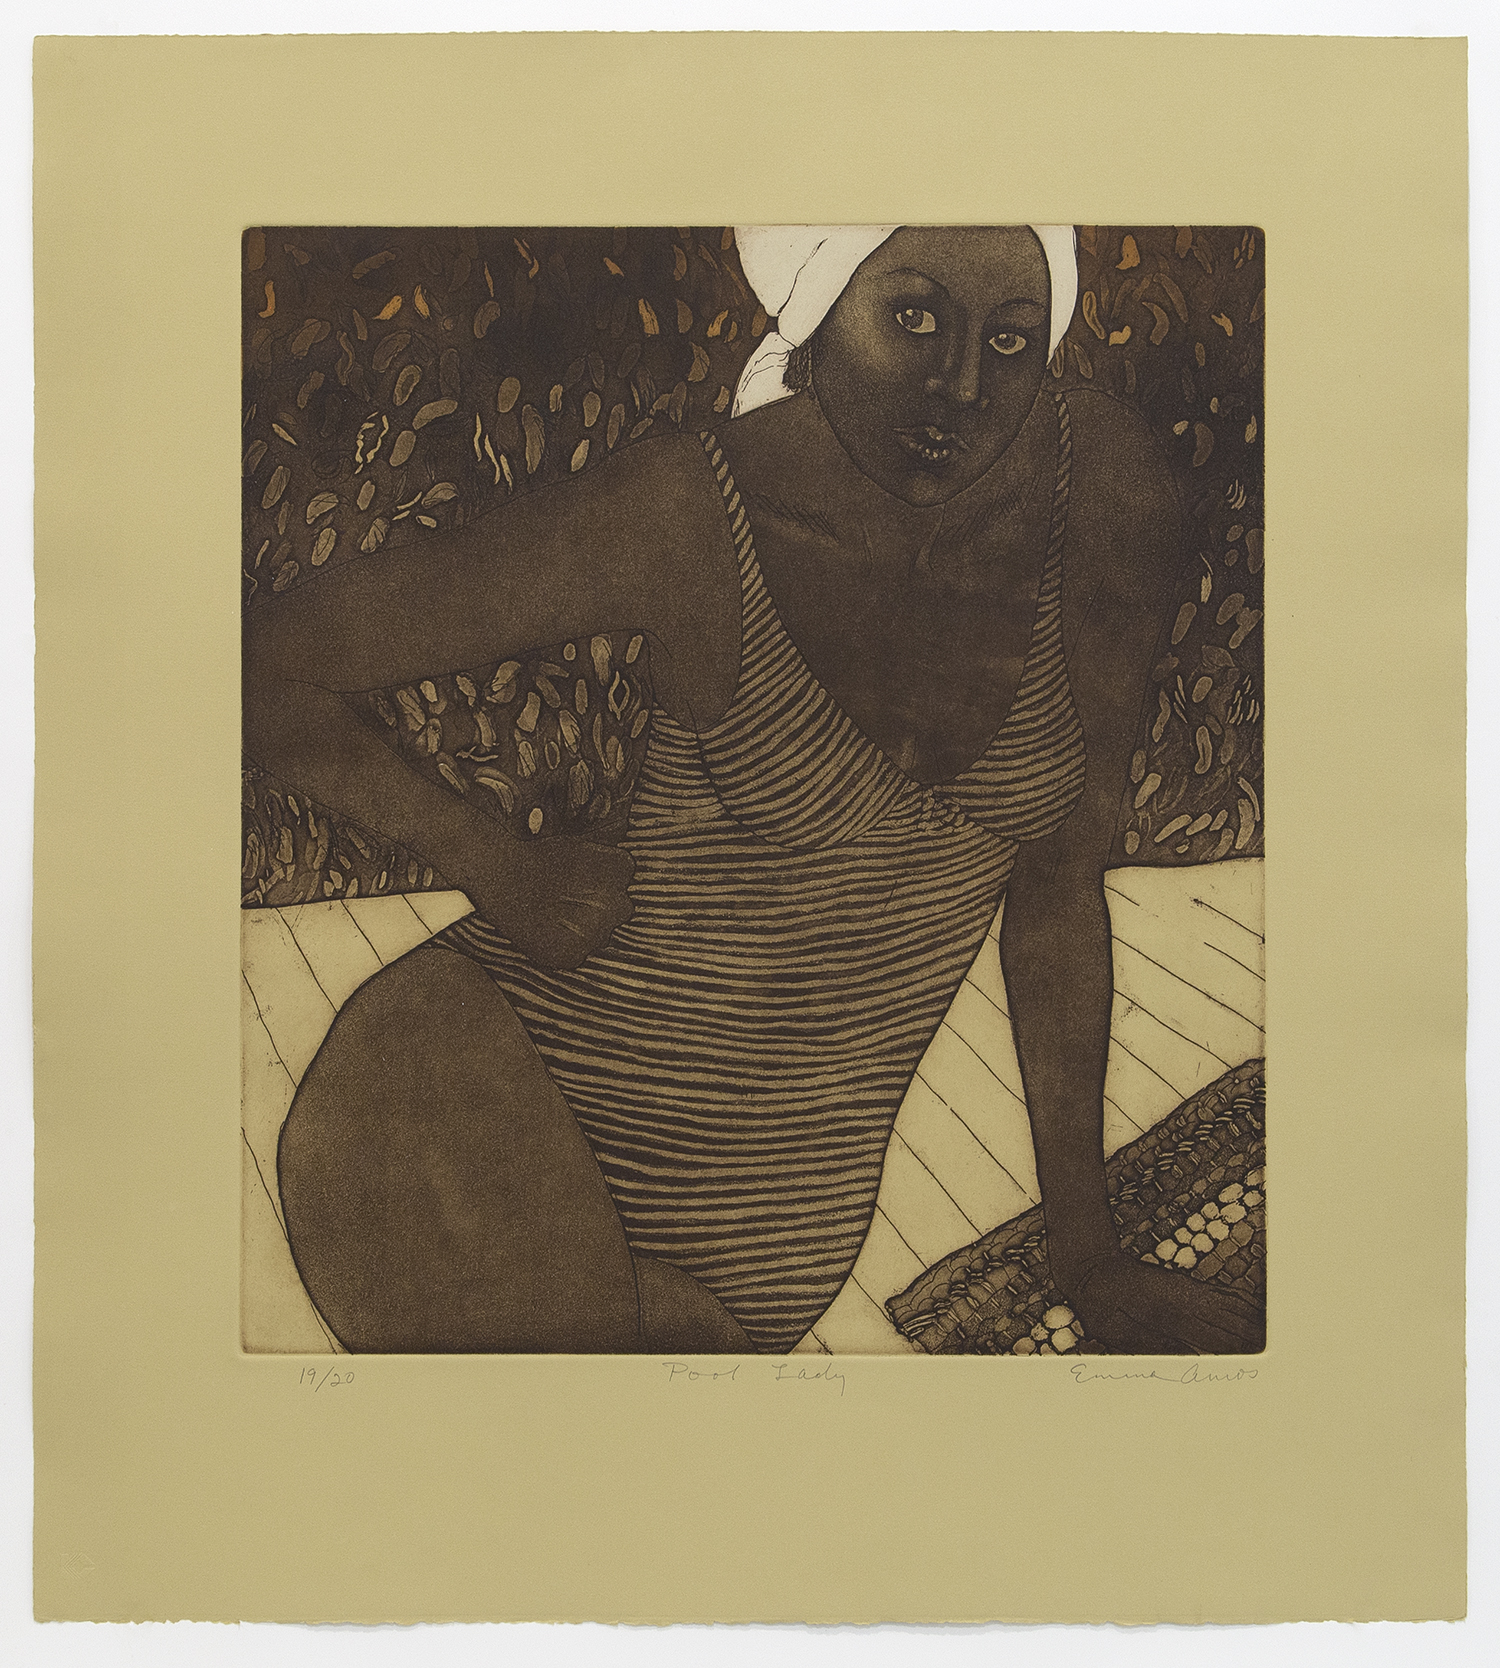 Pool Lady, 1980, Etching, aquatint and stryrene stencil, 23 1/4 x 21 1/4 inches (59.1 x 54 cm), Edition of 20